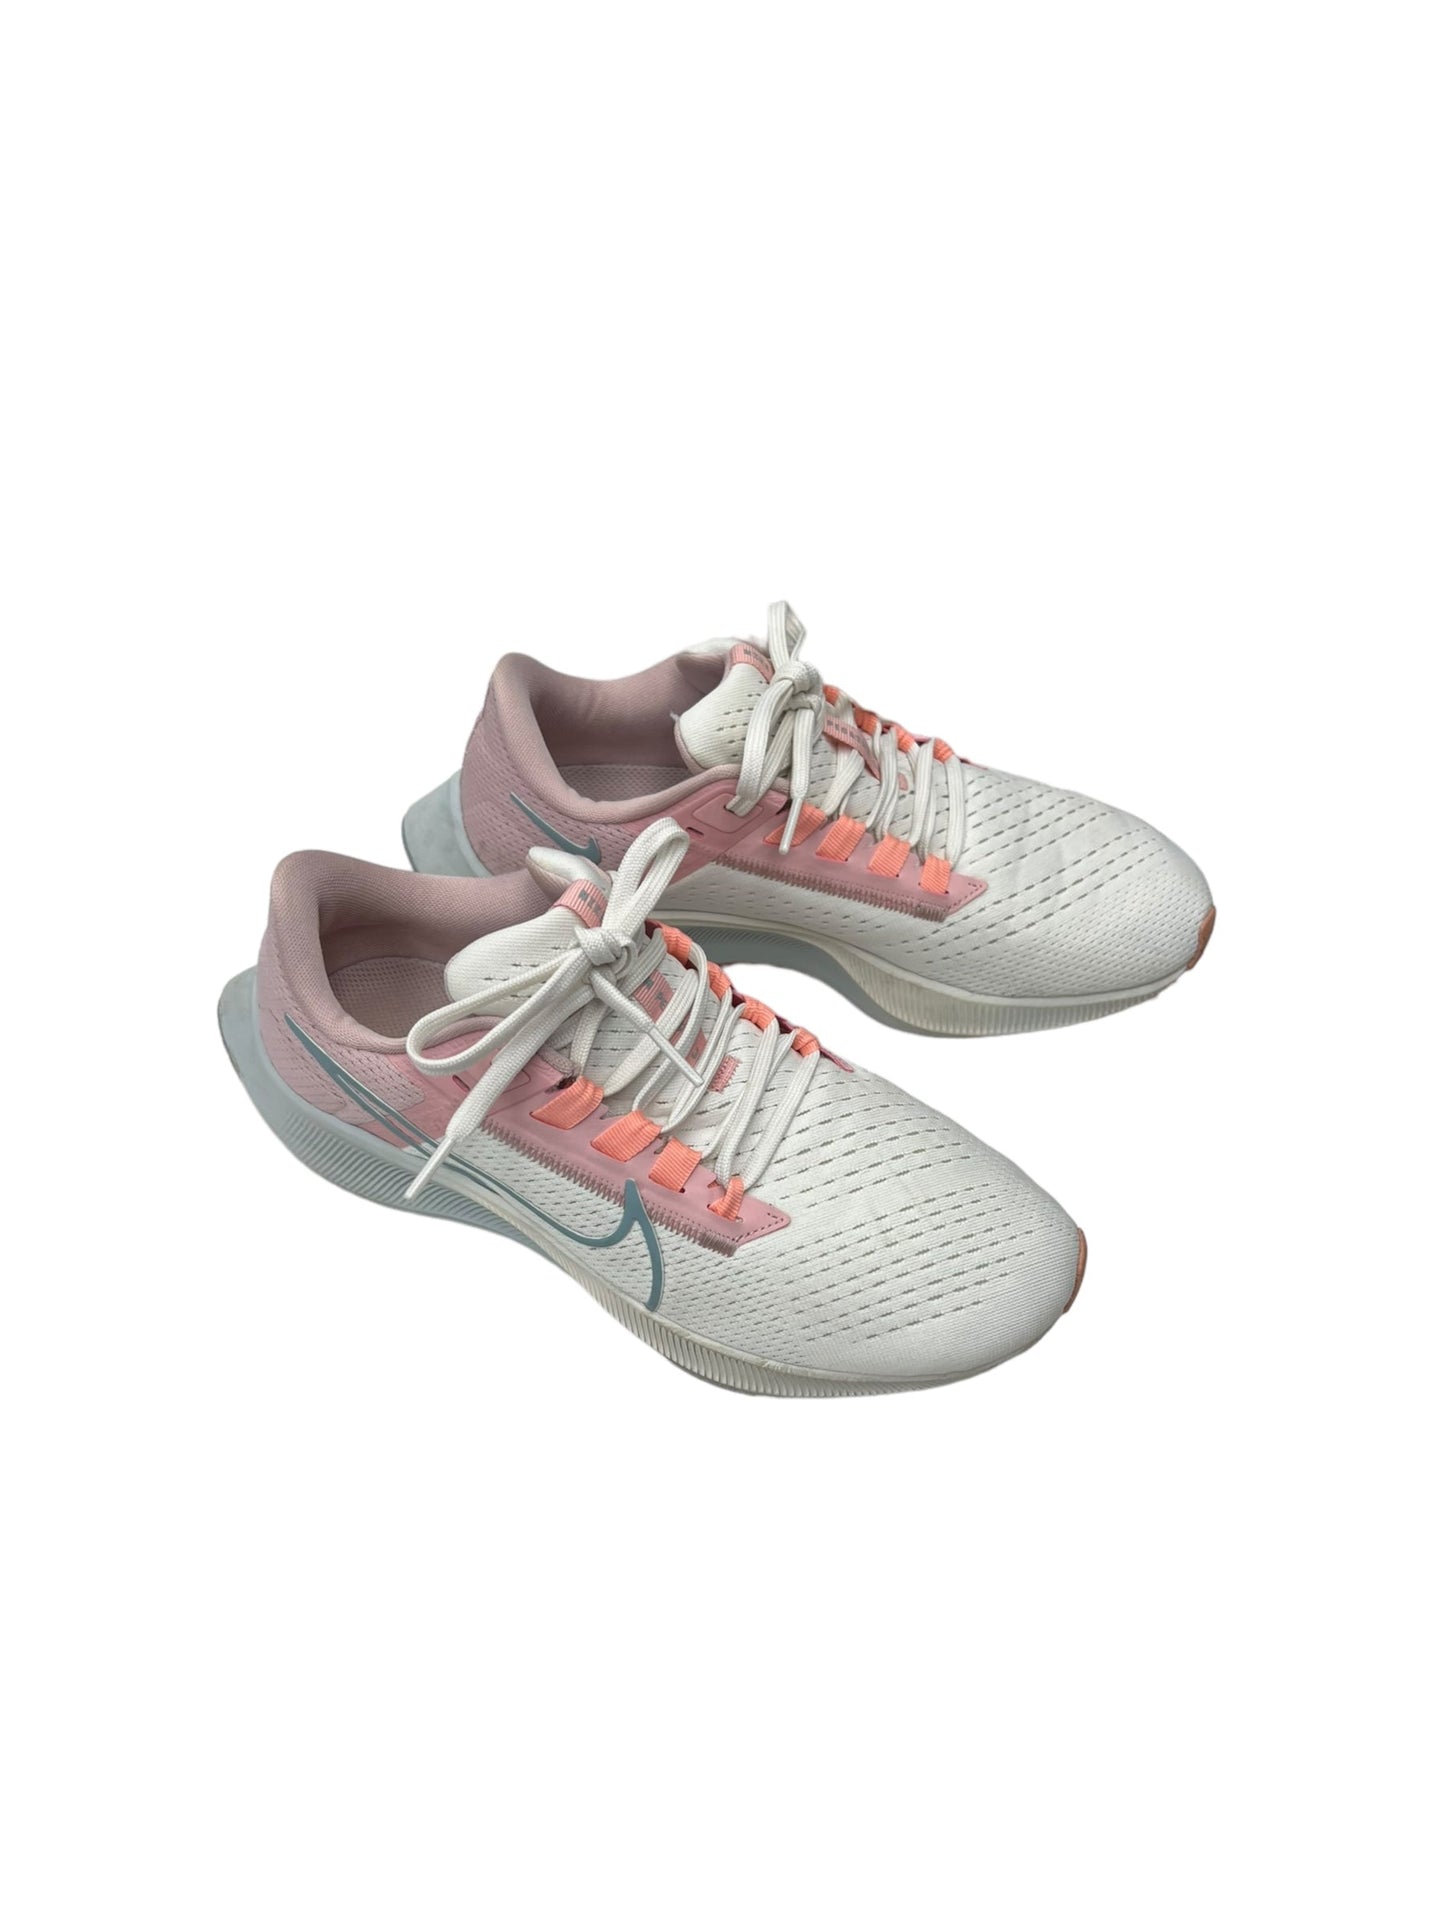 Pink & White Shoes Athletic Nike, Size 8